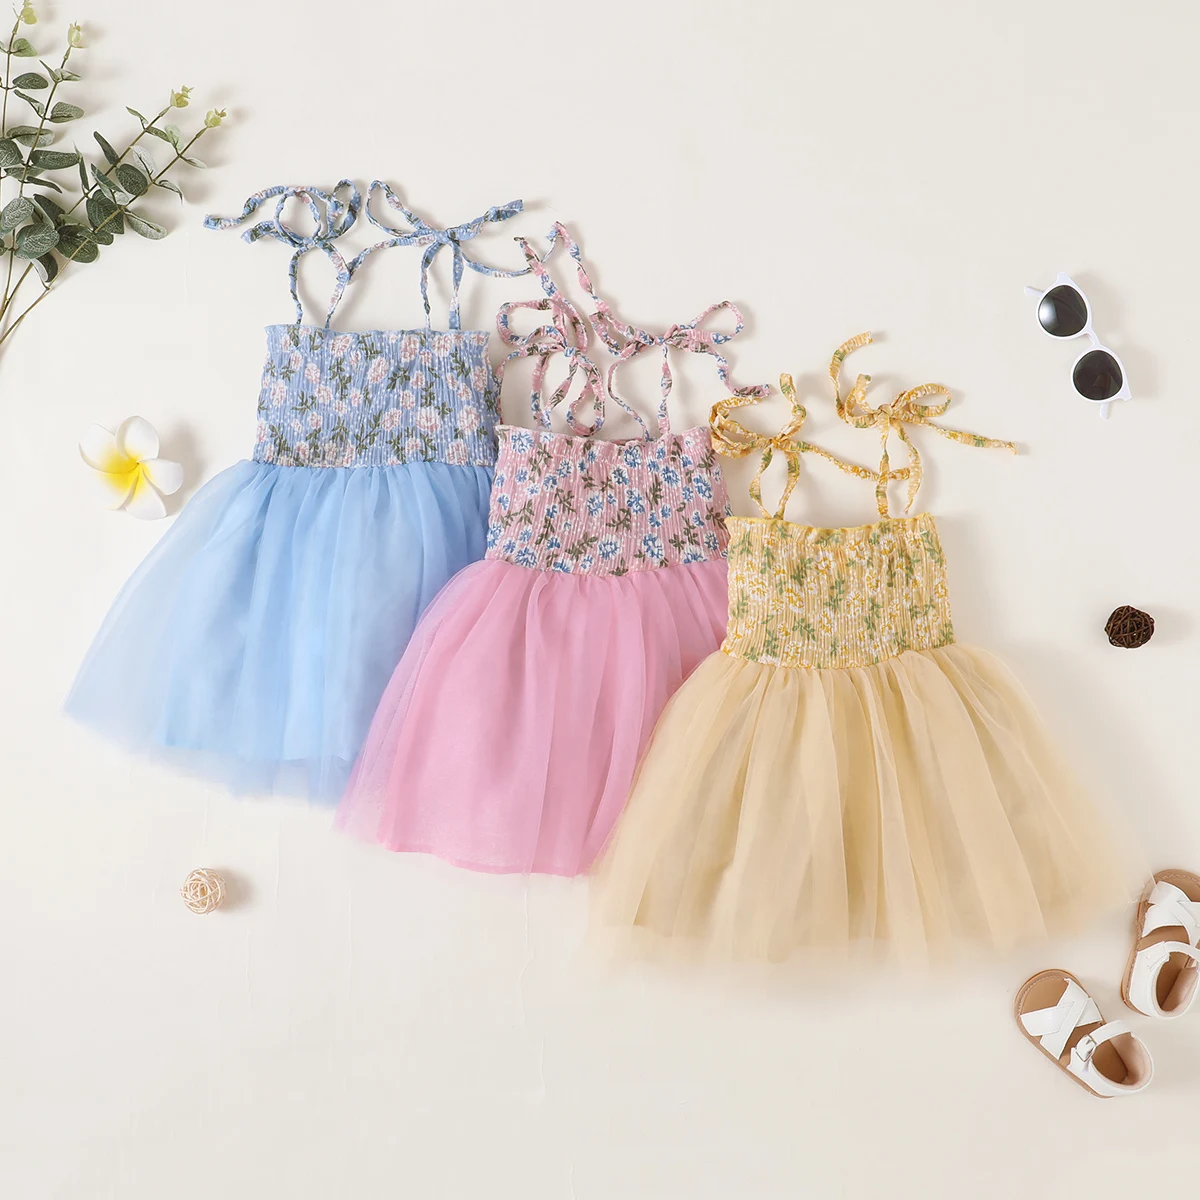 

3 Colors Summer Baby Girls Princess Dress Strap Sleeveless Flowers Printed Lace Patchwork Tutu Sundress 1-5Y